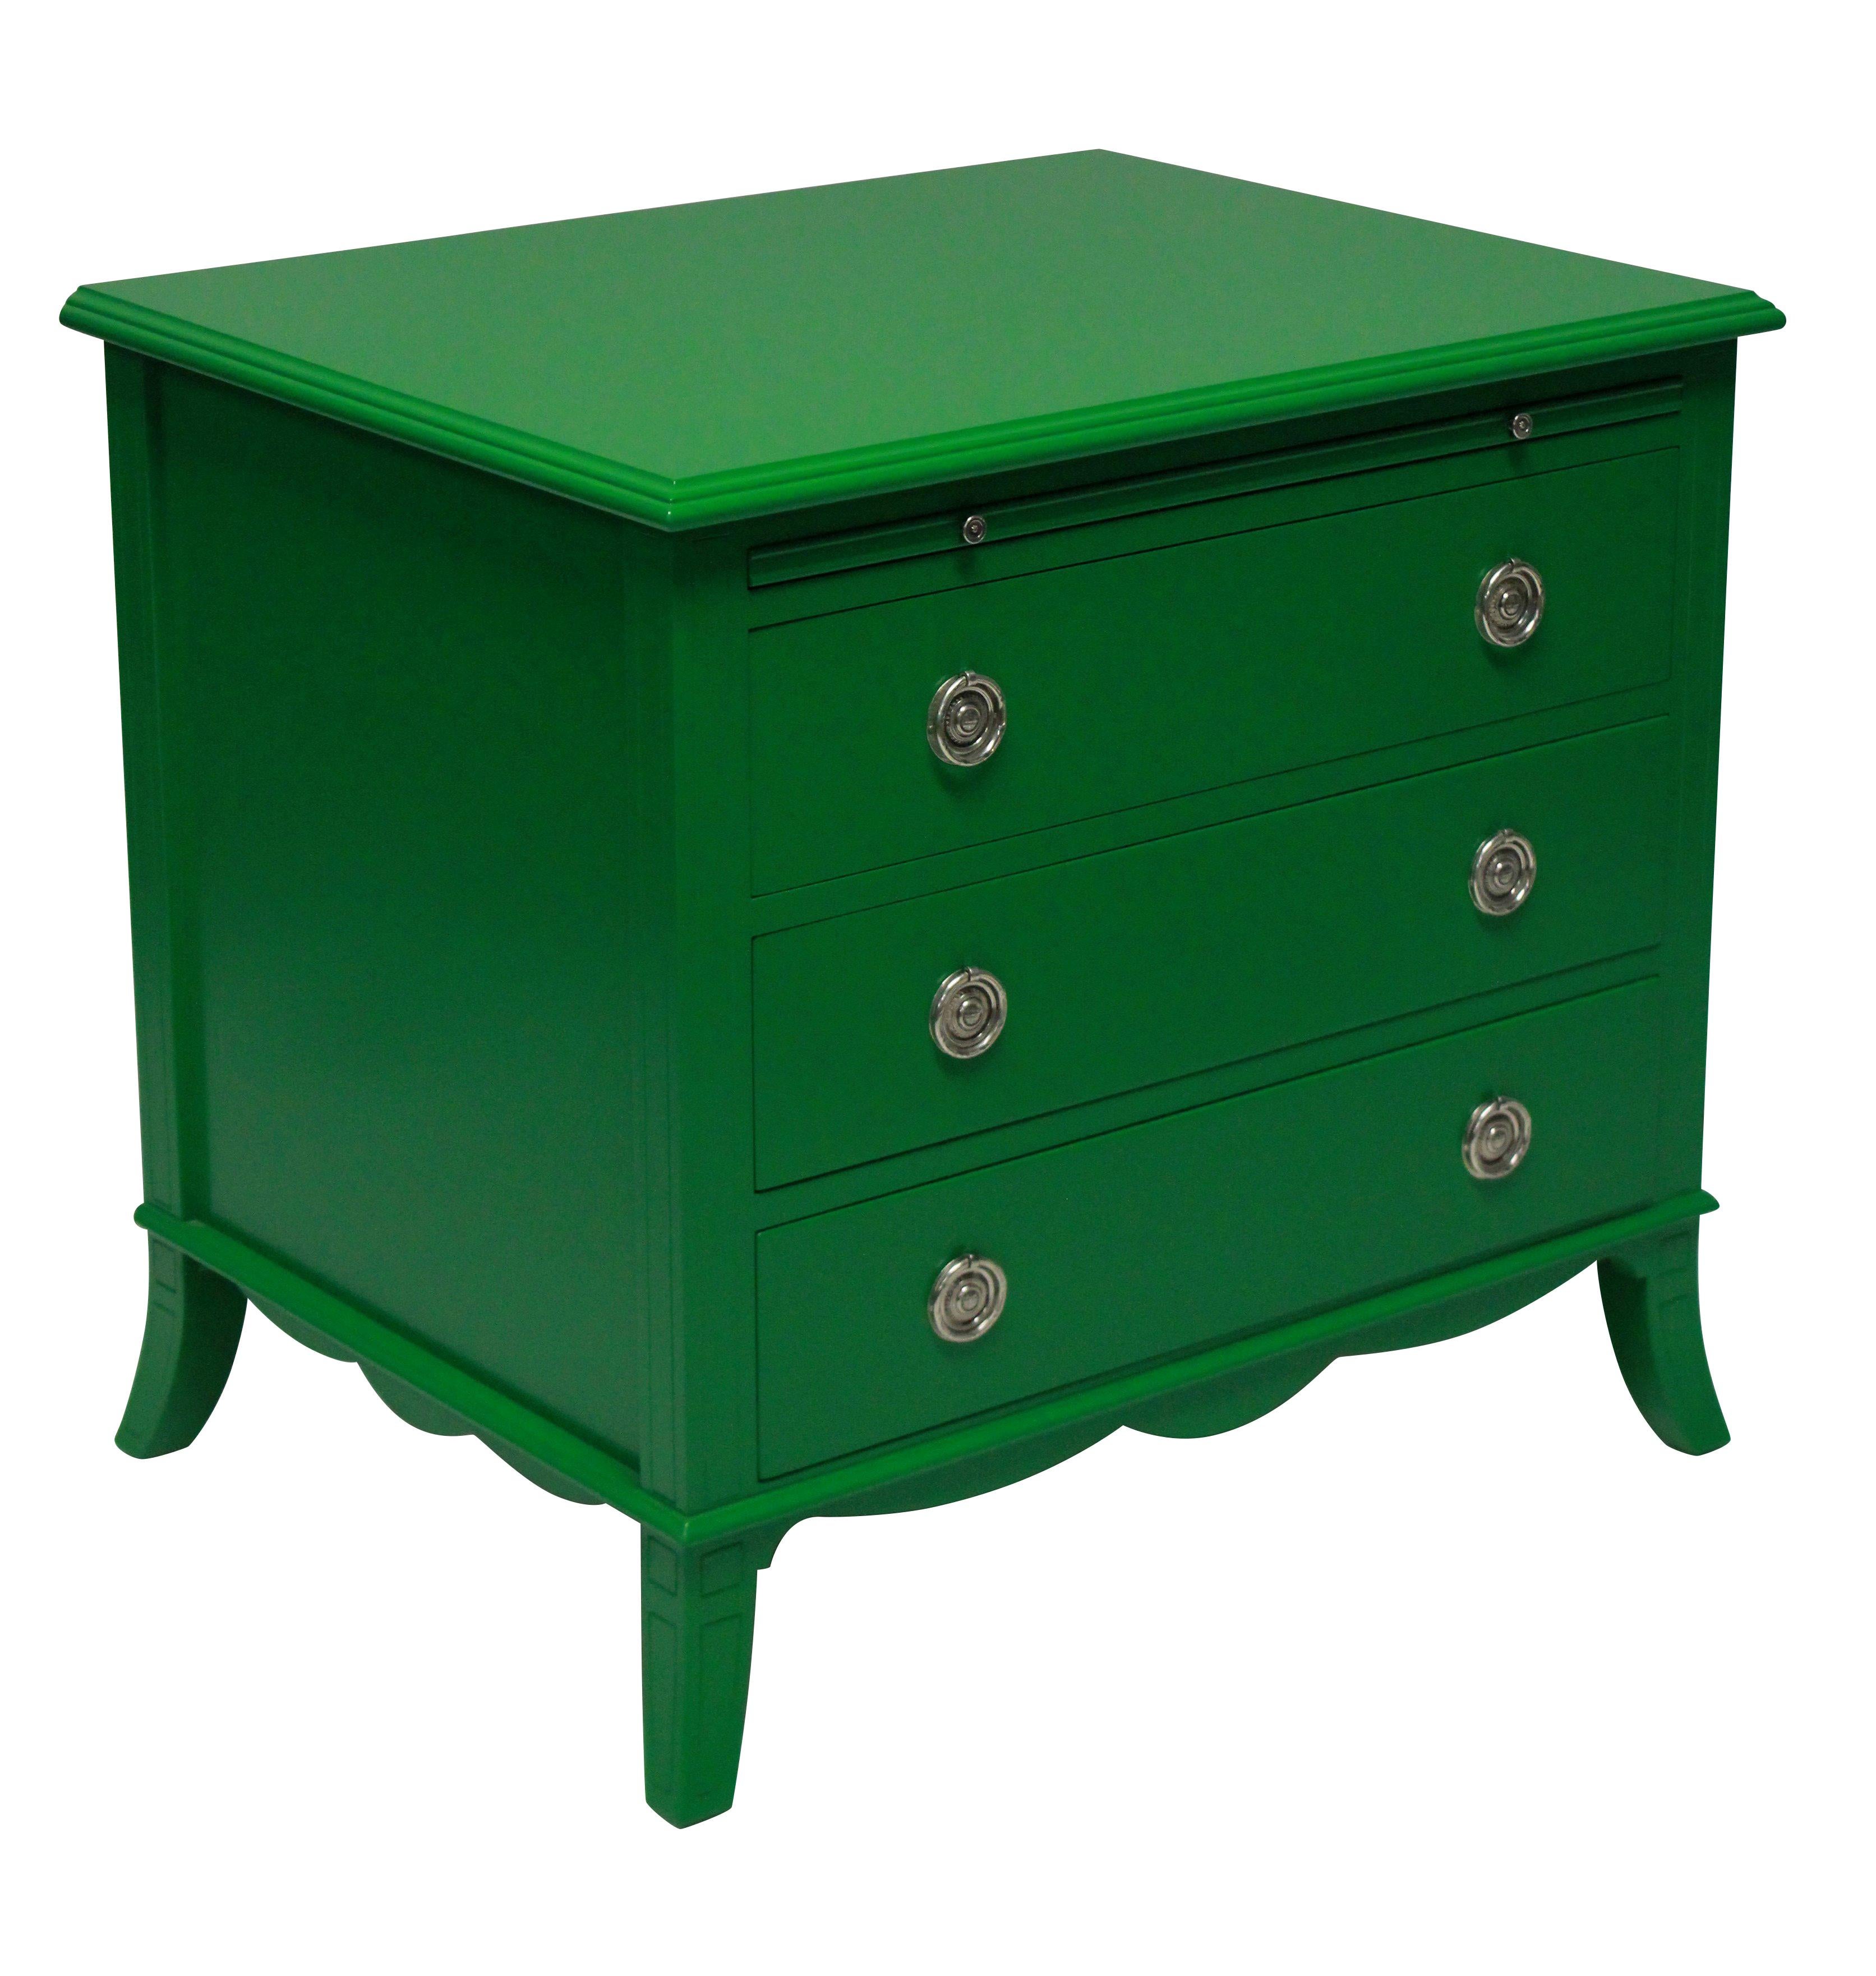 A pair of chests in green lacquer, each with three drawers and a deep leather brushing slide. The handles of silver plate.

